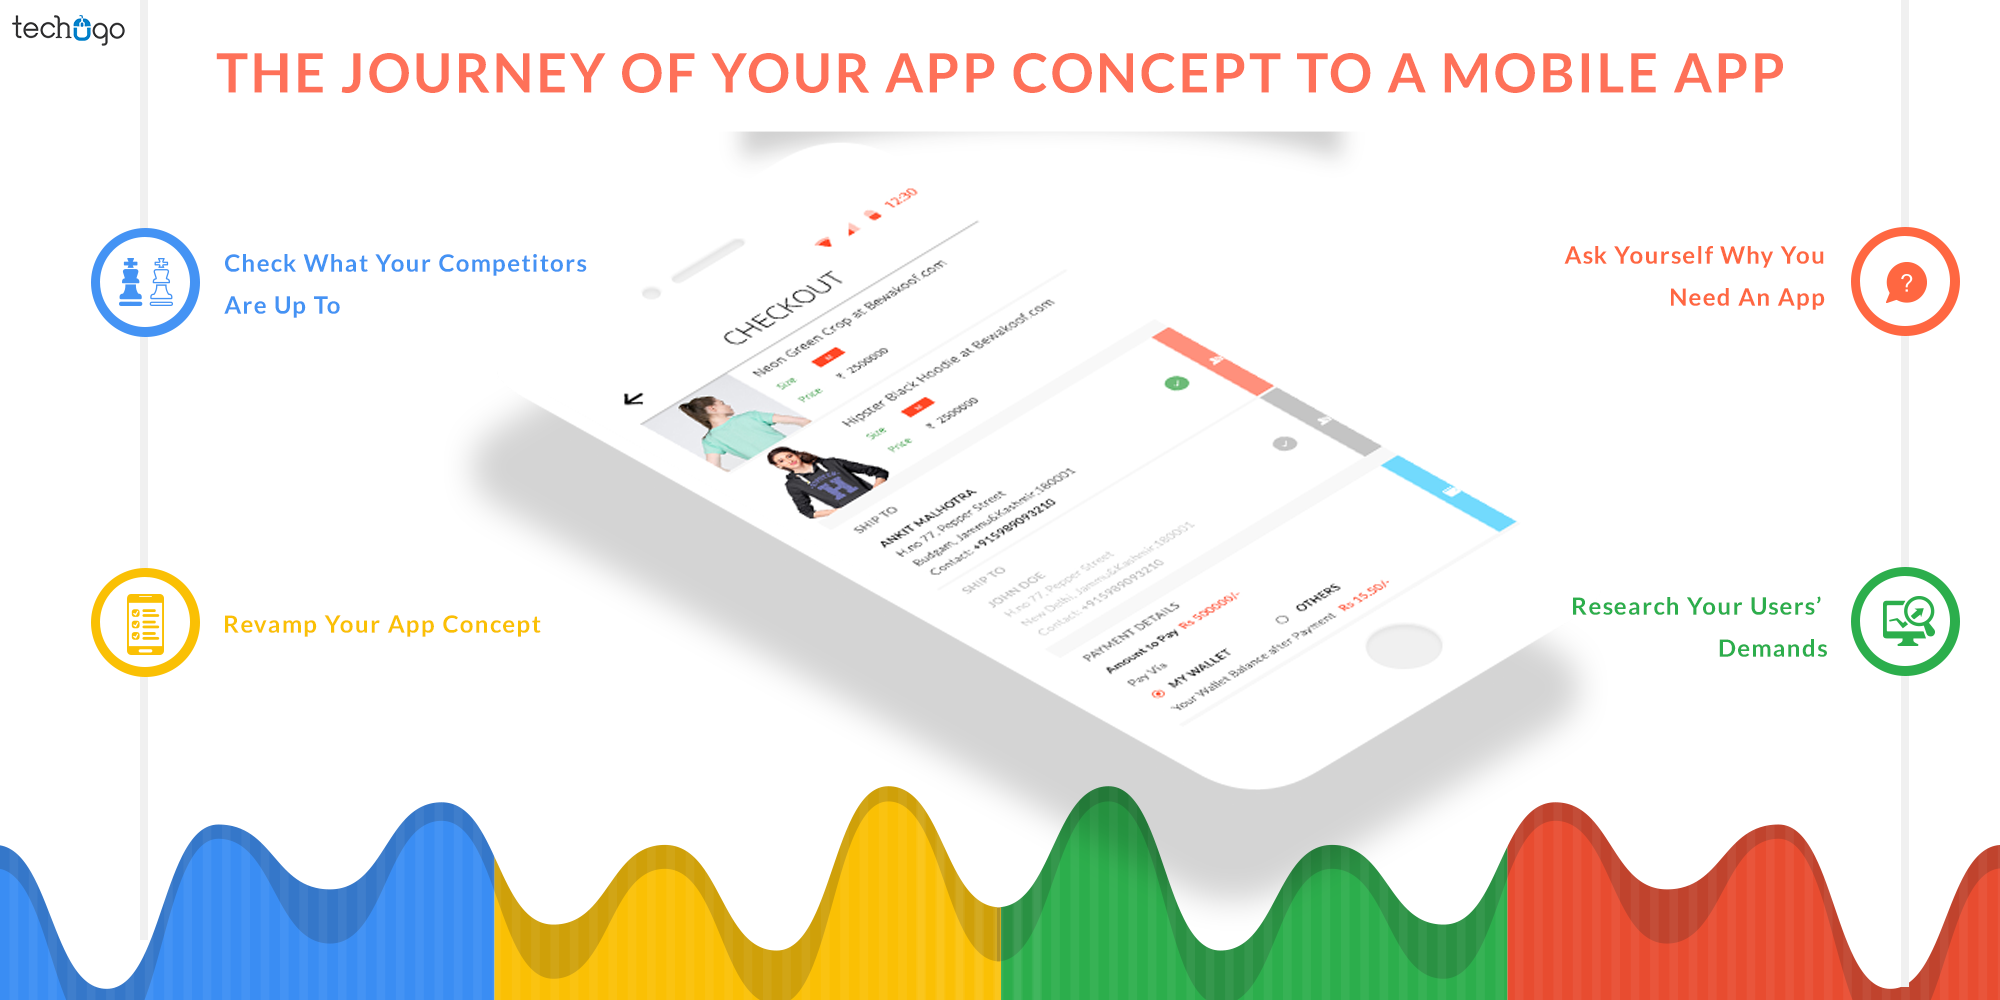 The Journey Of Your App Concept To A Mobile App